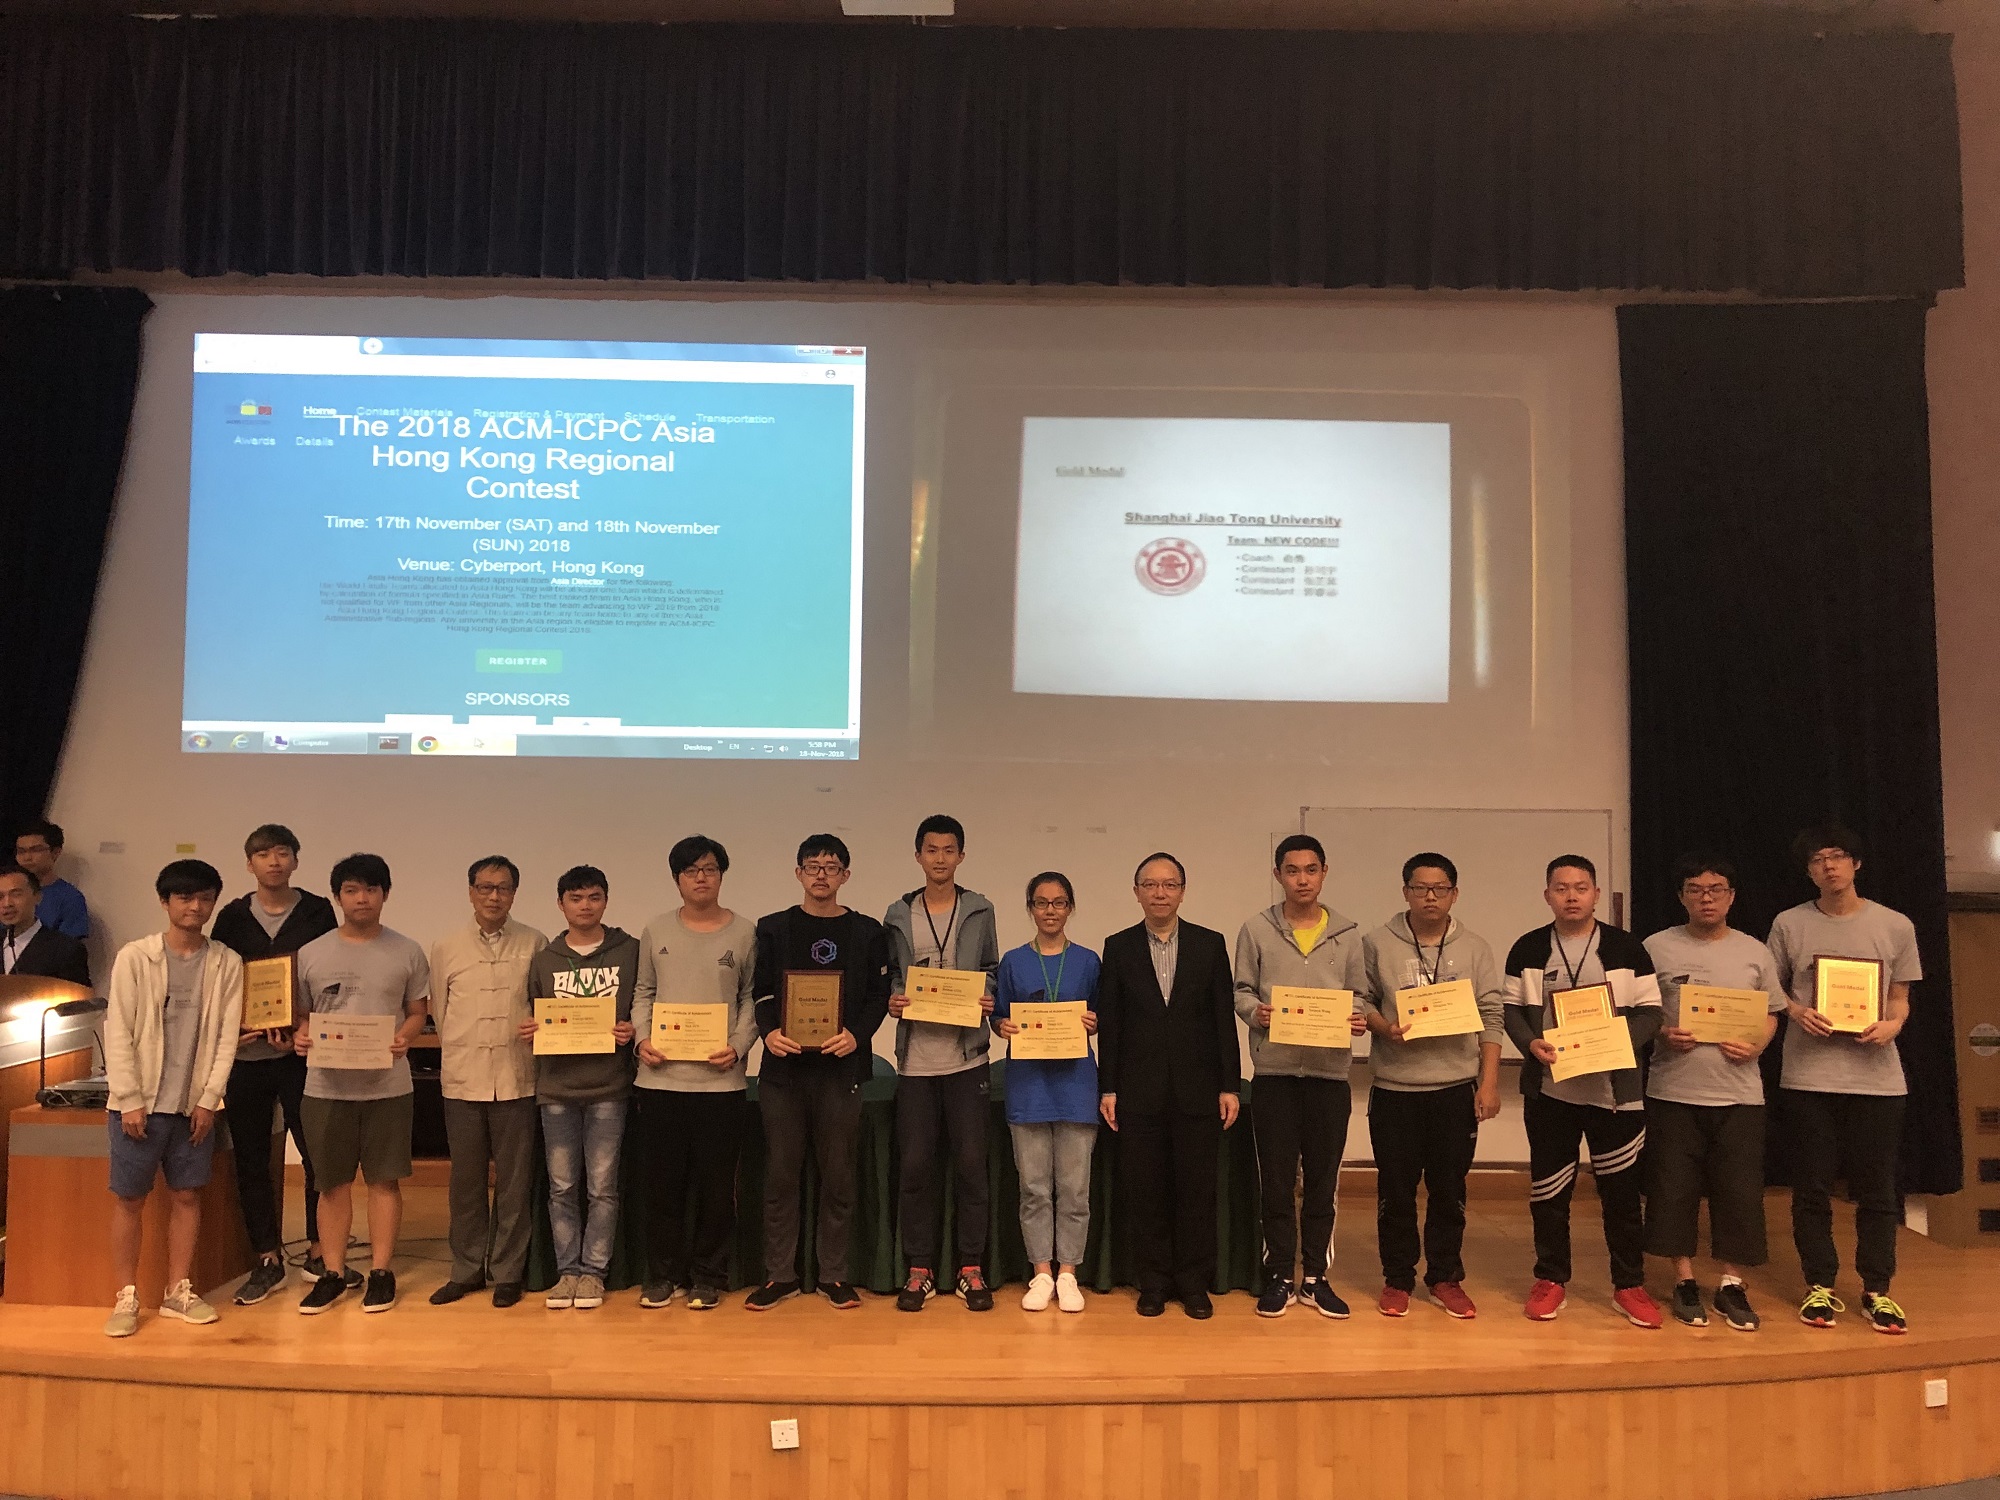 Mr. Victor Lam, Government Chief Information Officer, in group photo with the winning teams of gold medal, at the “Award Presentation Ceremony of 2018 ACM-ICPC Asia Hong Kong Regional Contest”